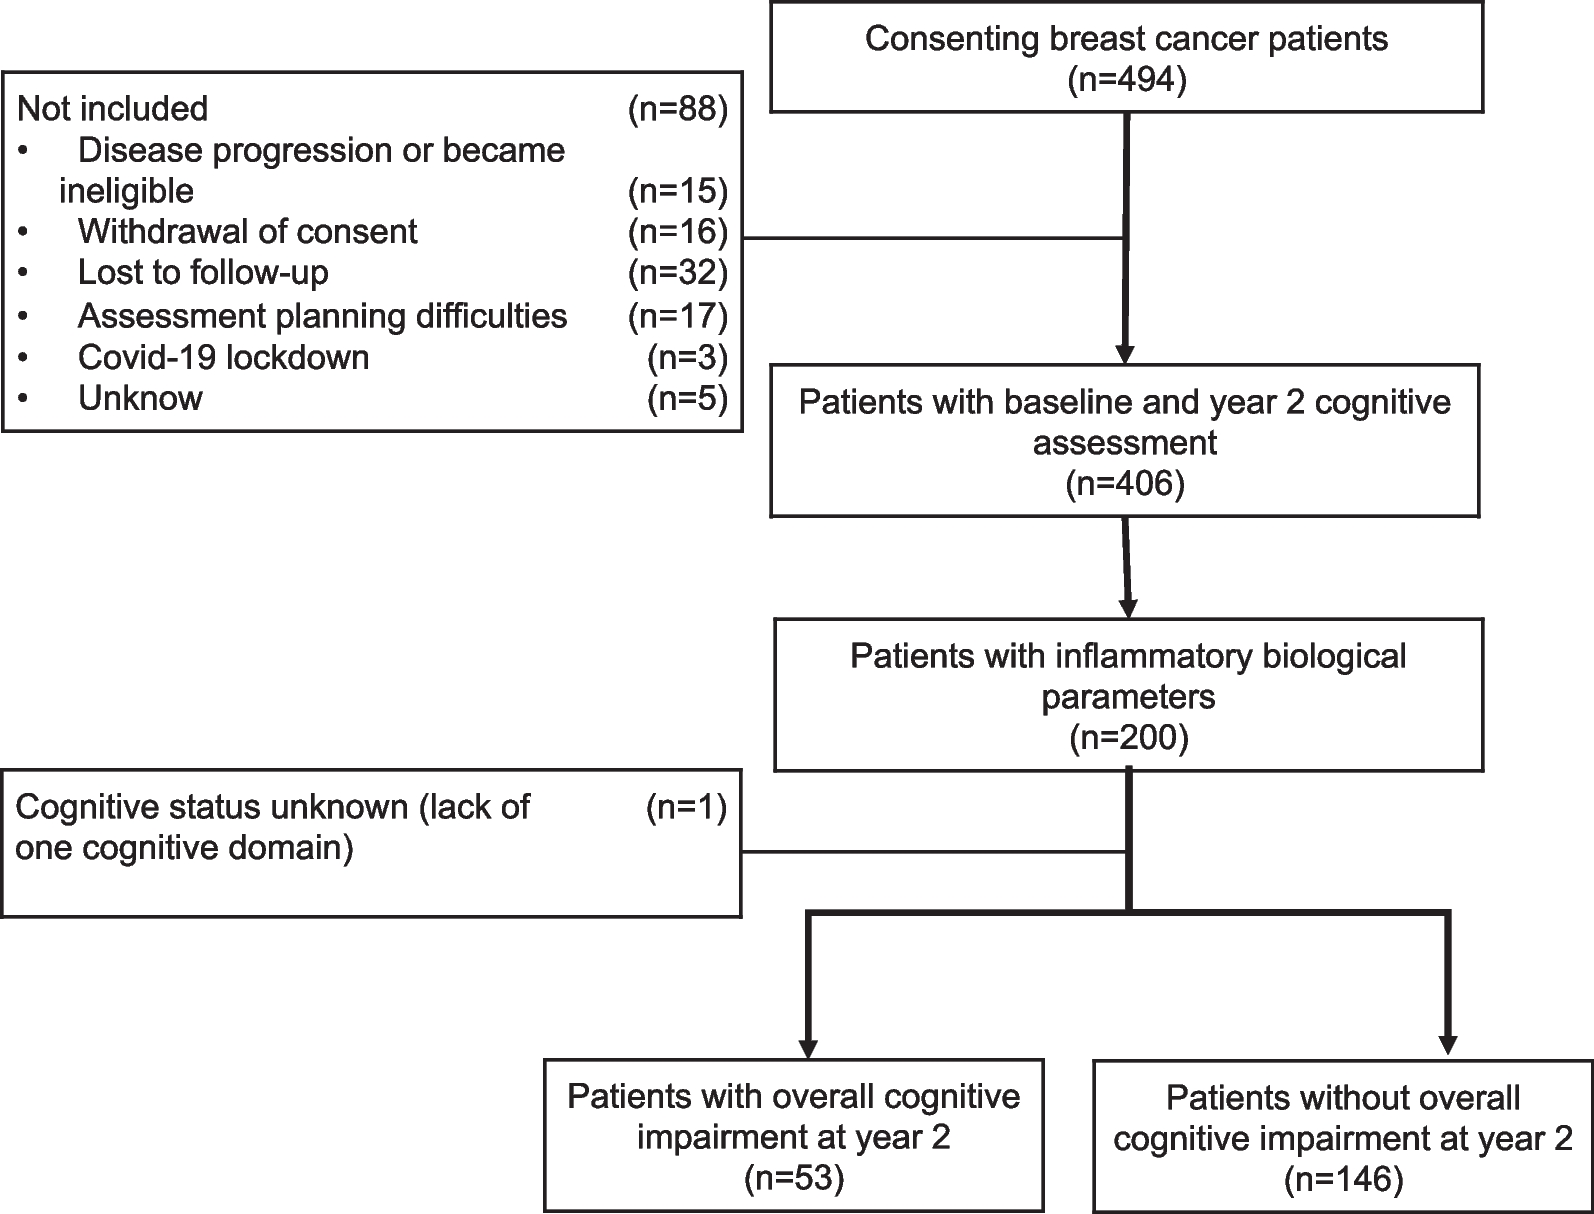 Inflammation at diagnosis and cognitive impairment two years later in breast cancer patients from the Canto-Cog study